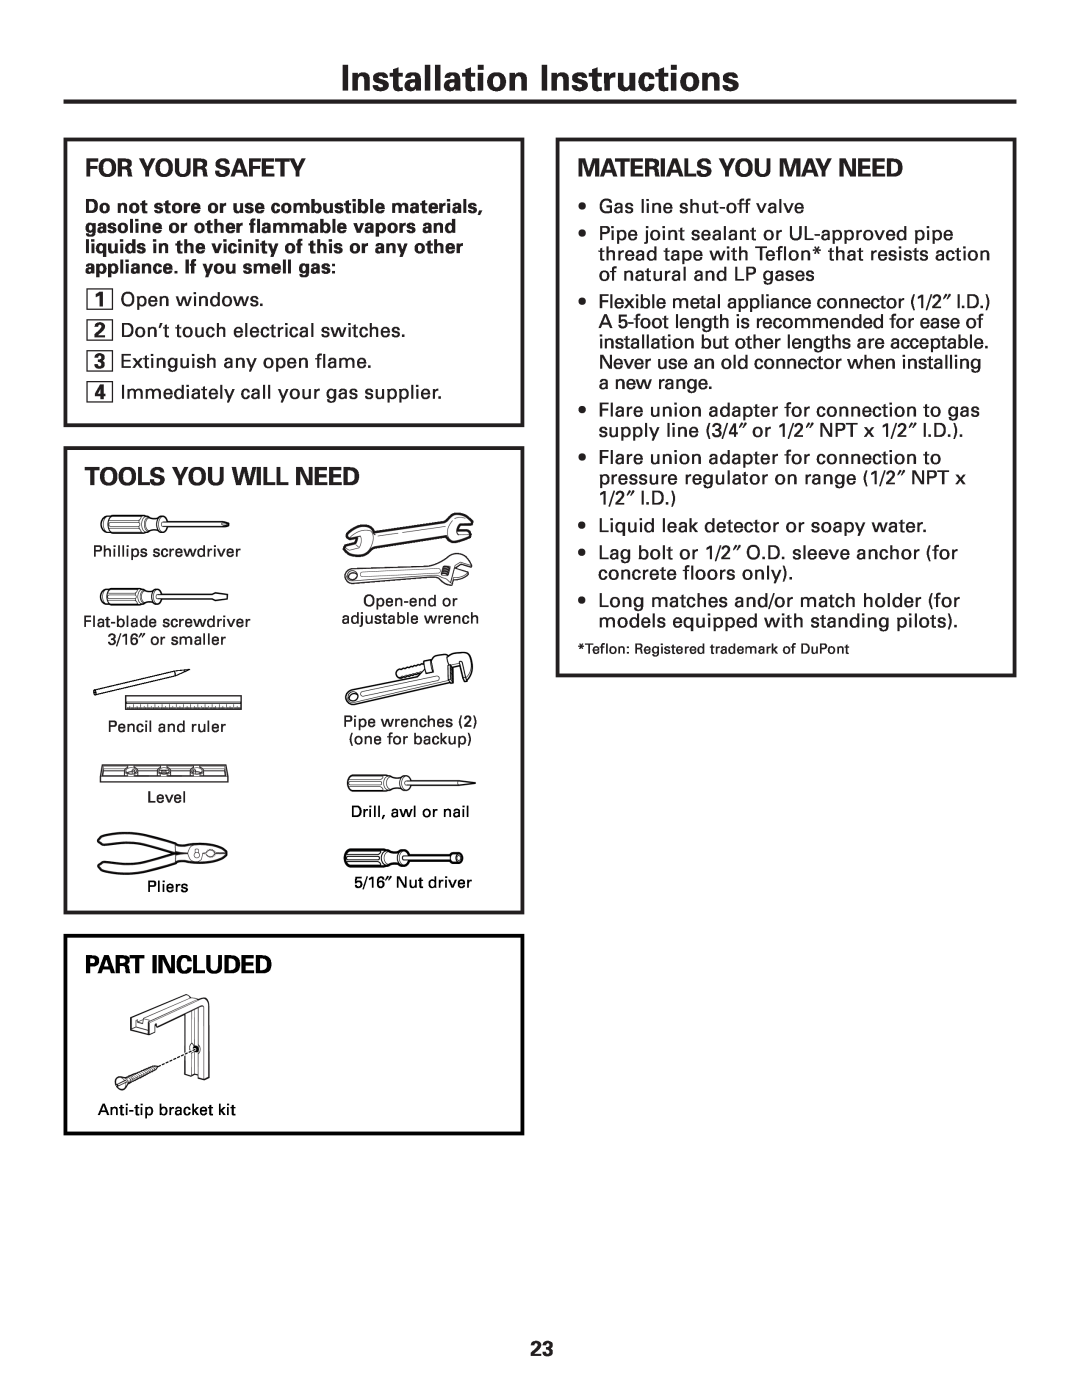 GE JGAS02 Installation Instructions, For Your Safety, Tools You Will Need, Part Included, Materials You May Need 